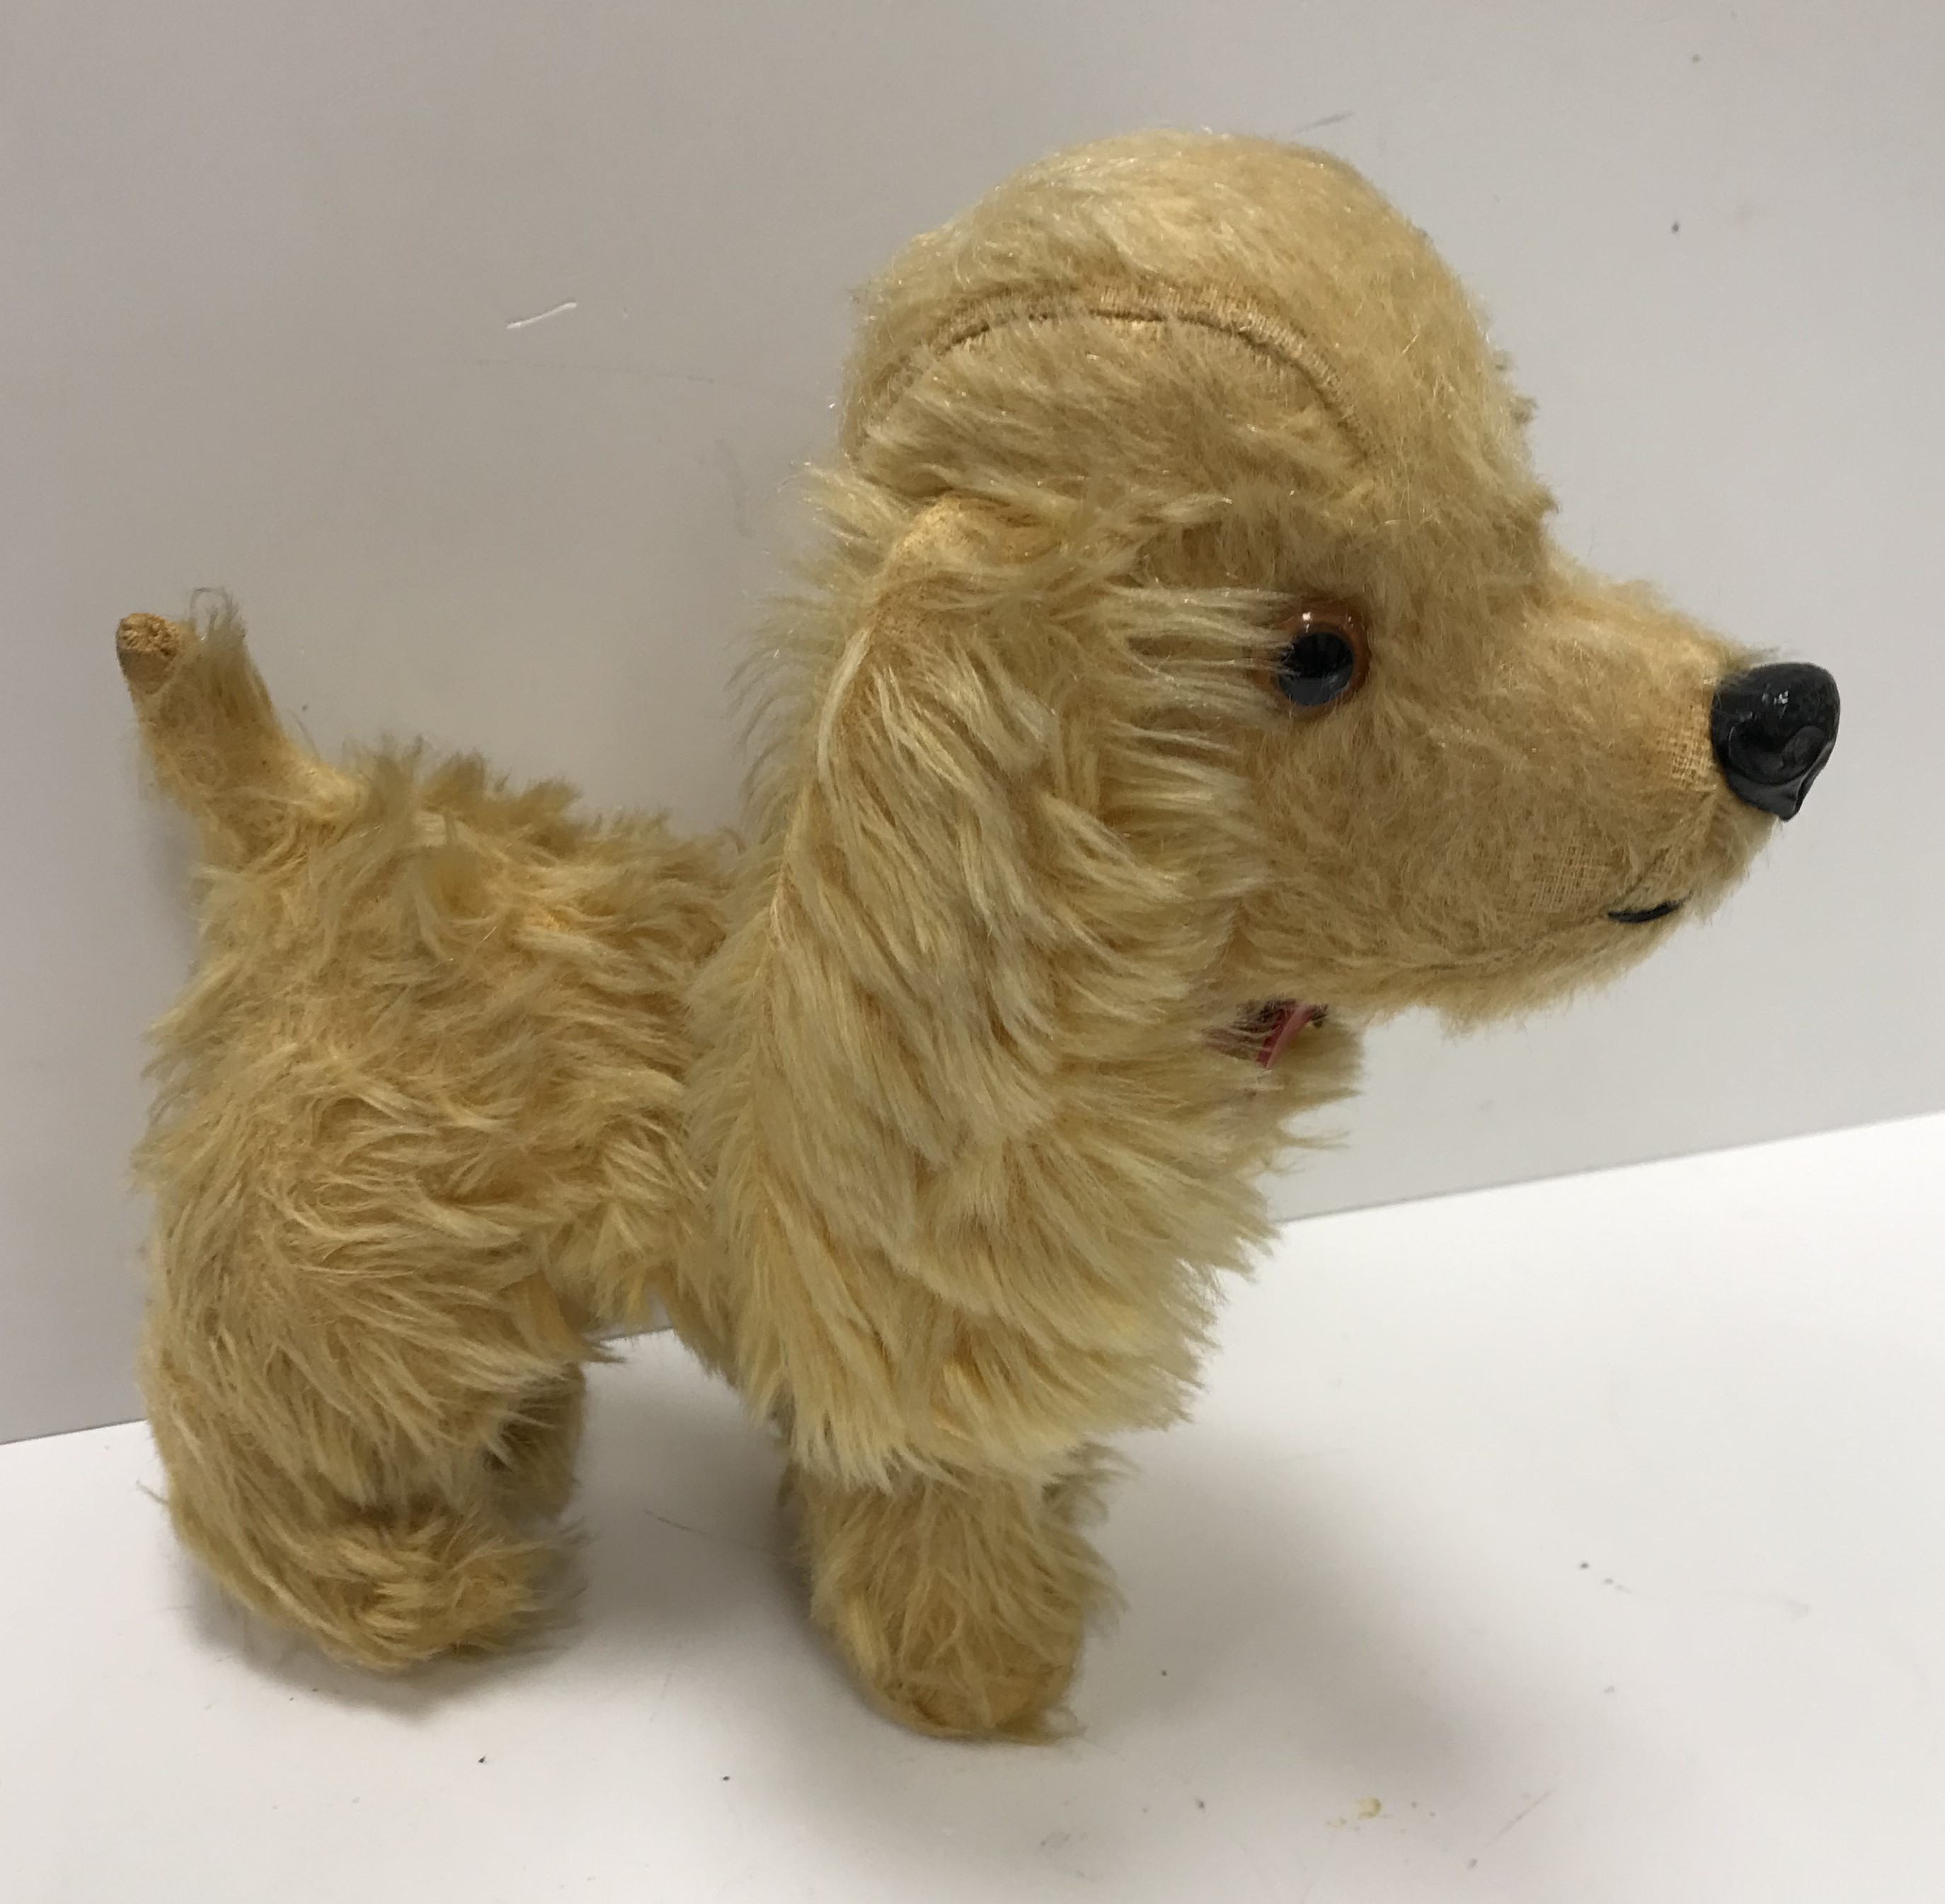 A felt covered soft "Golly" toy, 57 cm high and a Pedigree gold plush dog figure, - Image 2 of 3